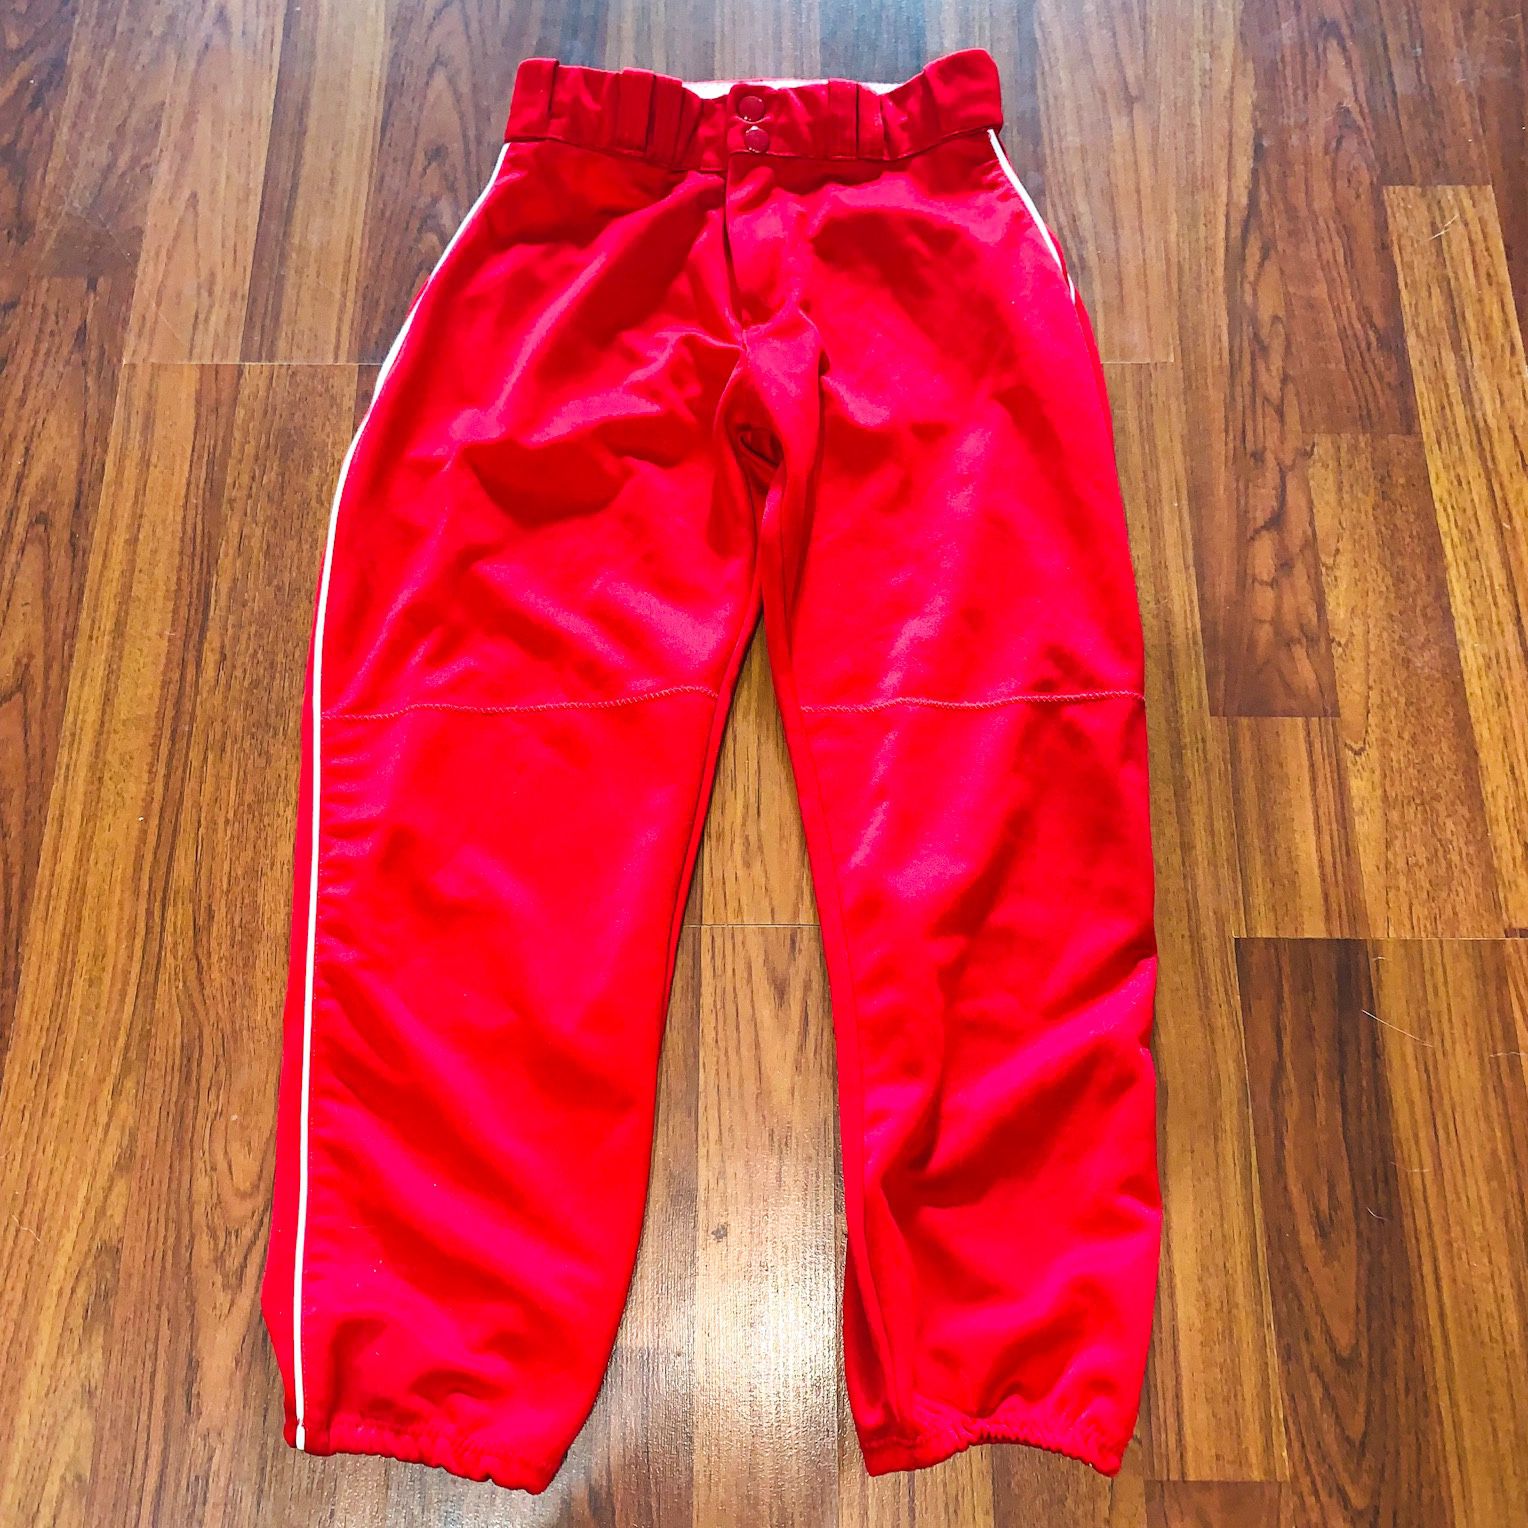 Alleson Athletics Women’s Red/White Softball Pants Size Small